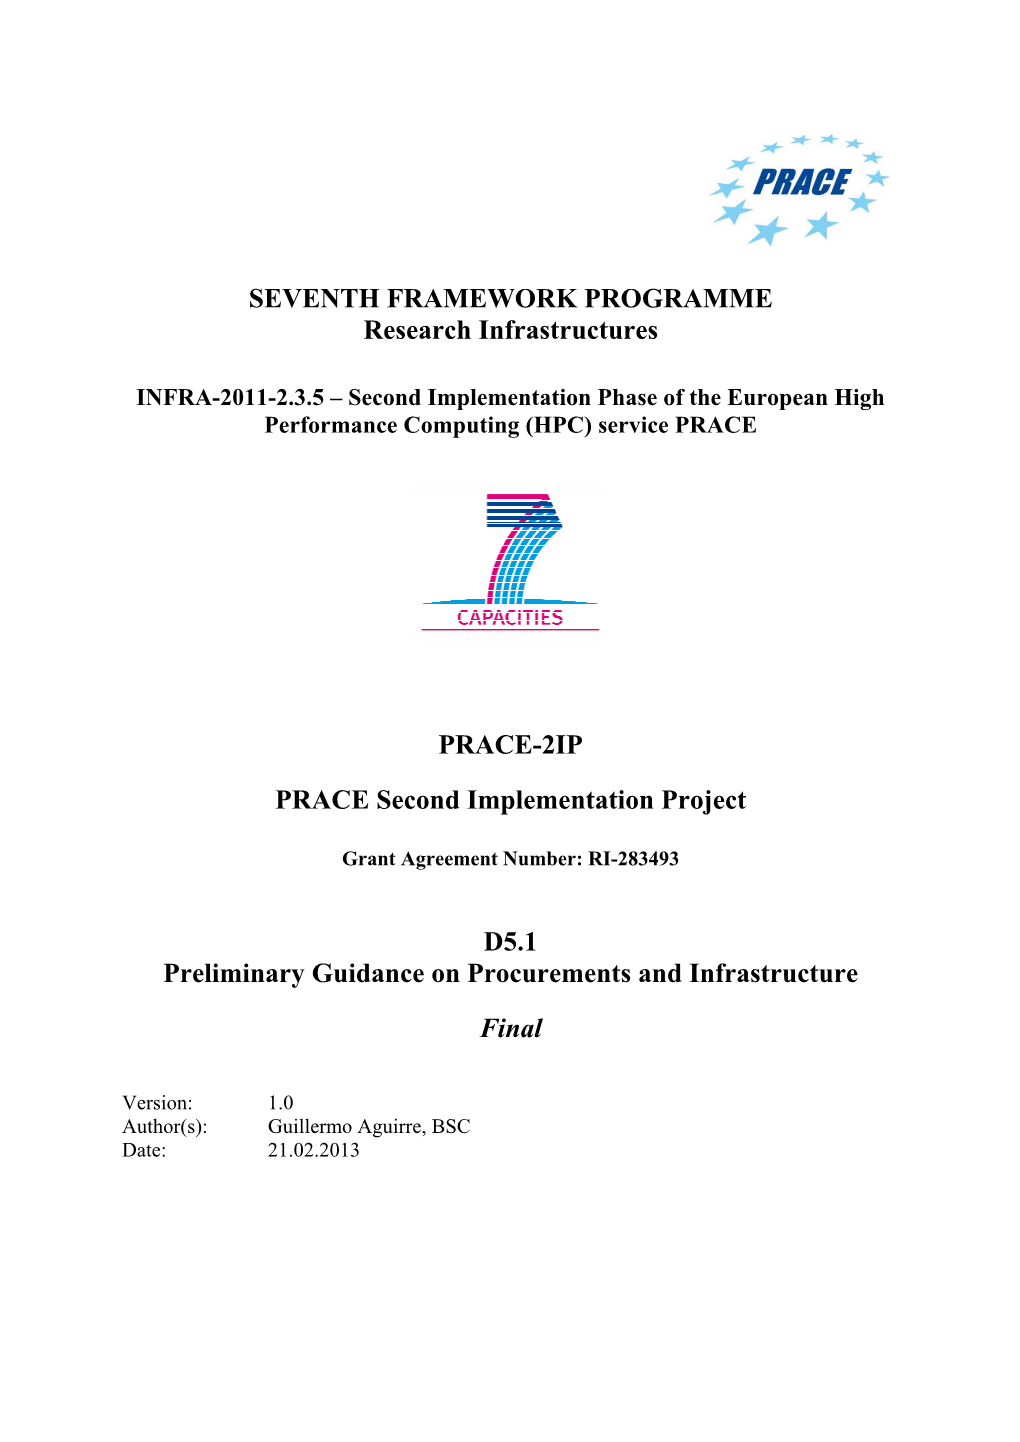 SEVENTH FRAMEWORK PROGRAMME Research Infrastructures PRACE-2IP PRACE Second Implementation Project D5.1 Preliminary Guidance On